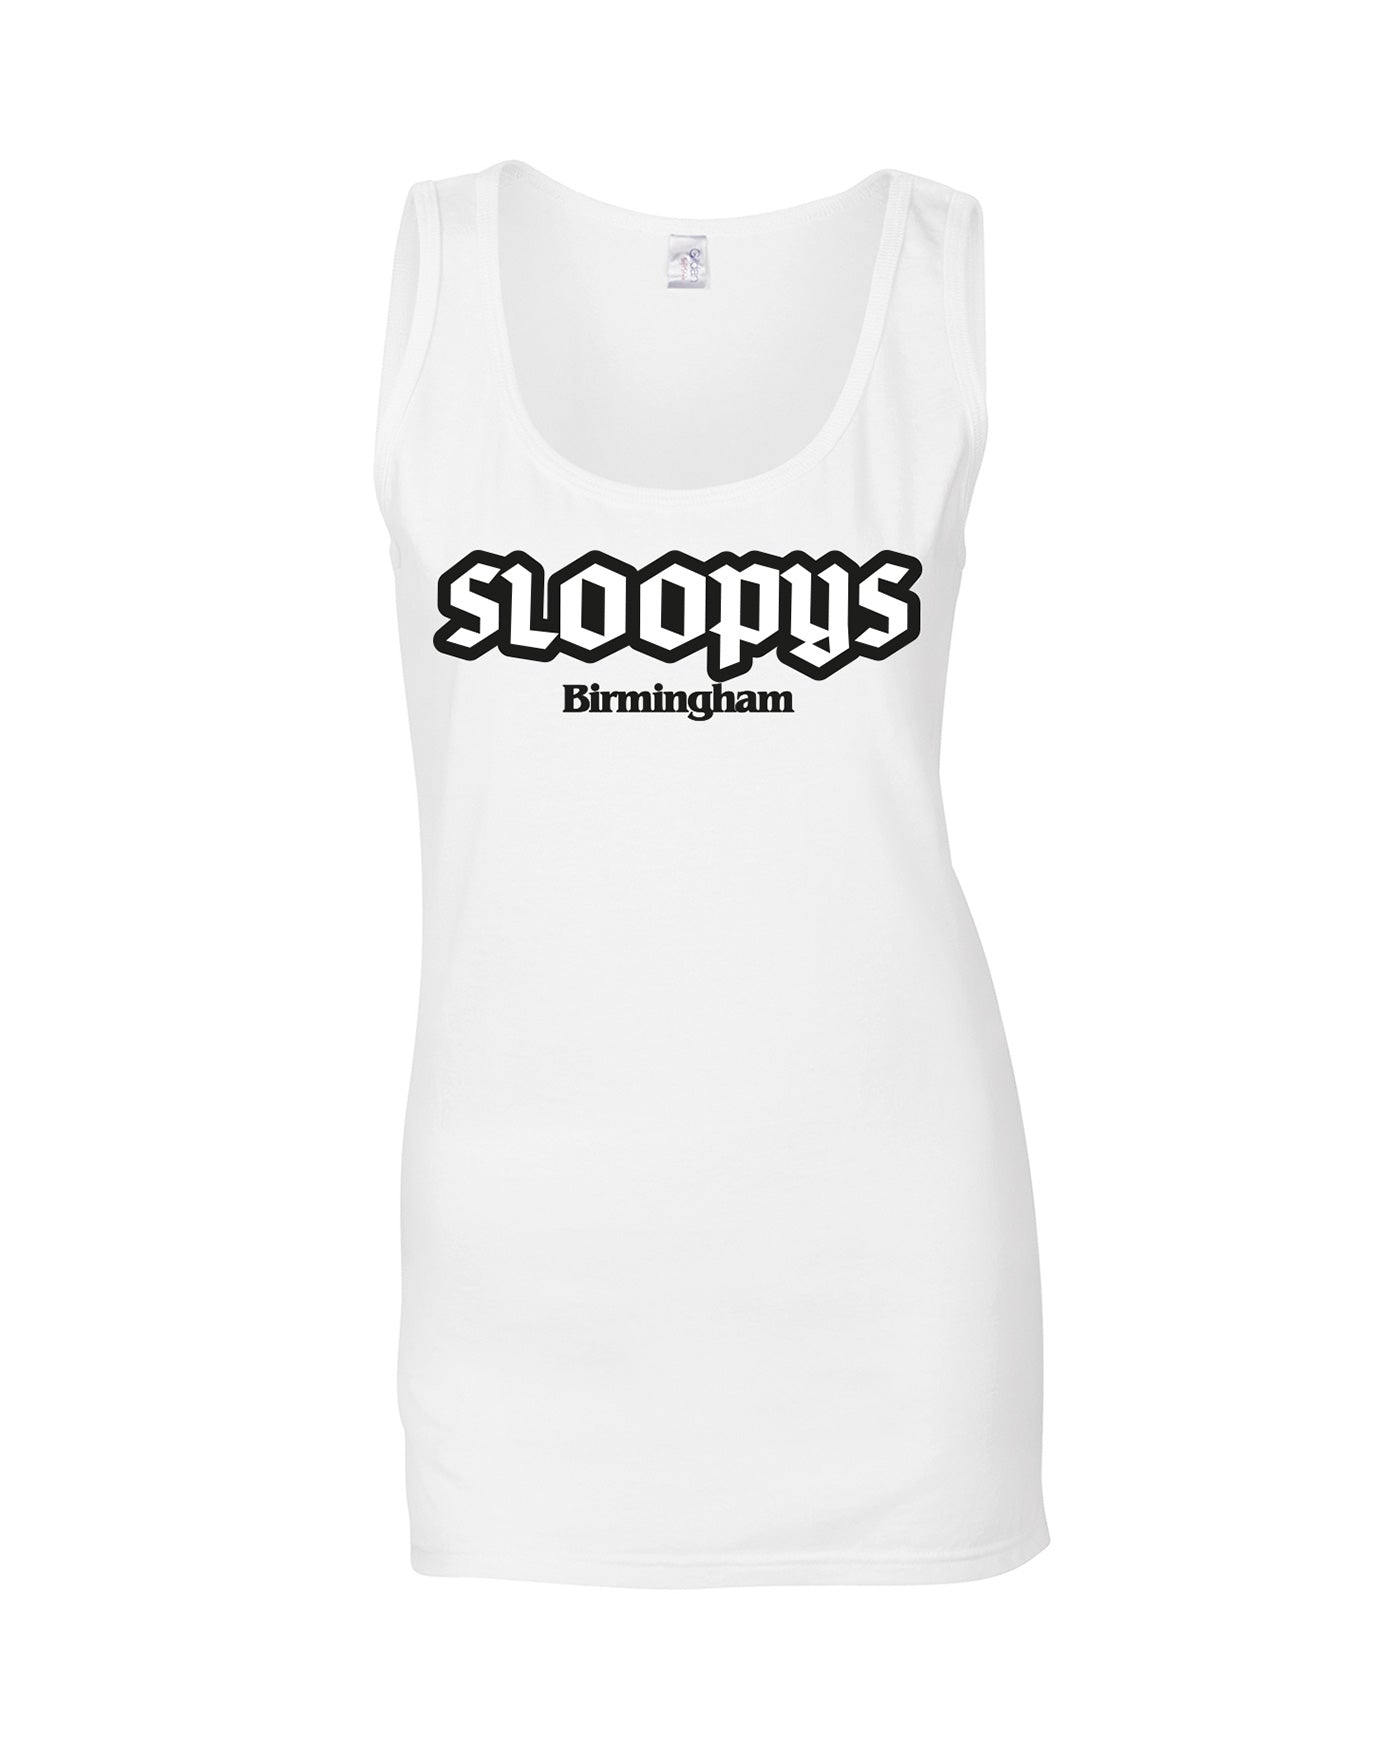 Sloopys ladies fit vest - various colours - Dirty Stop Outs